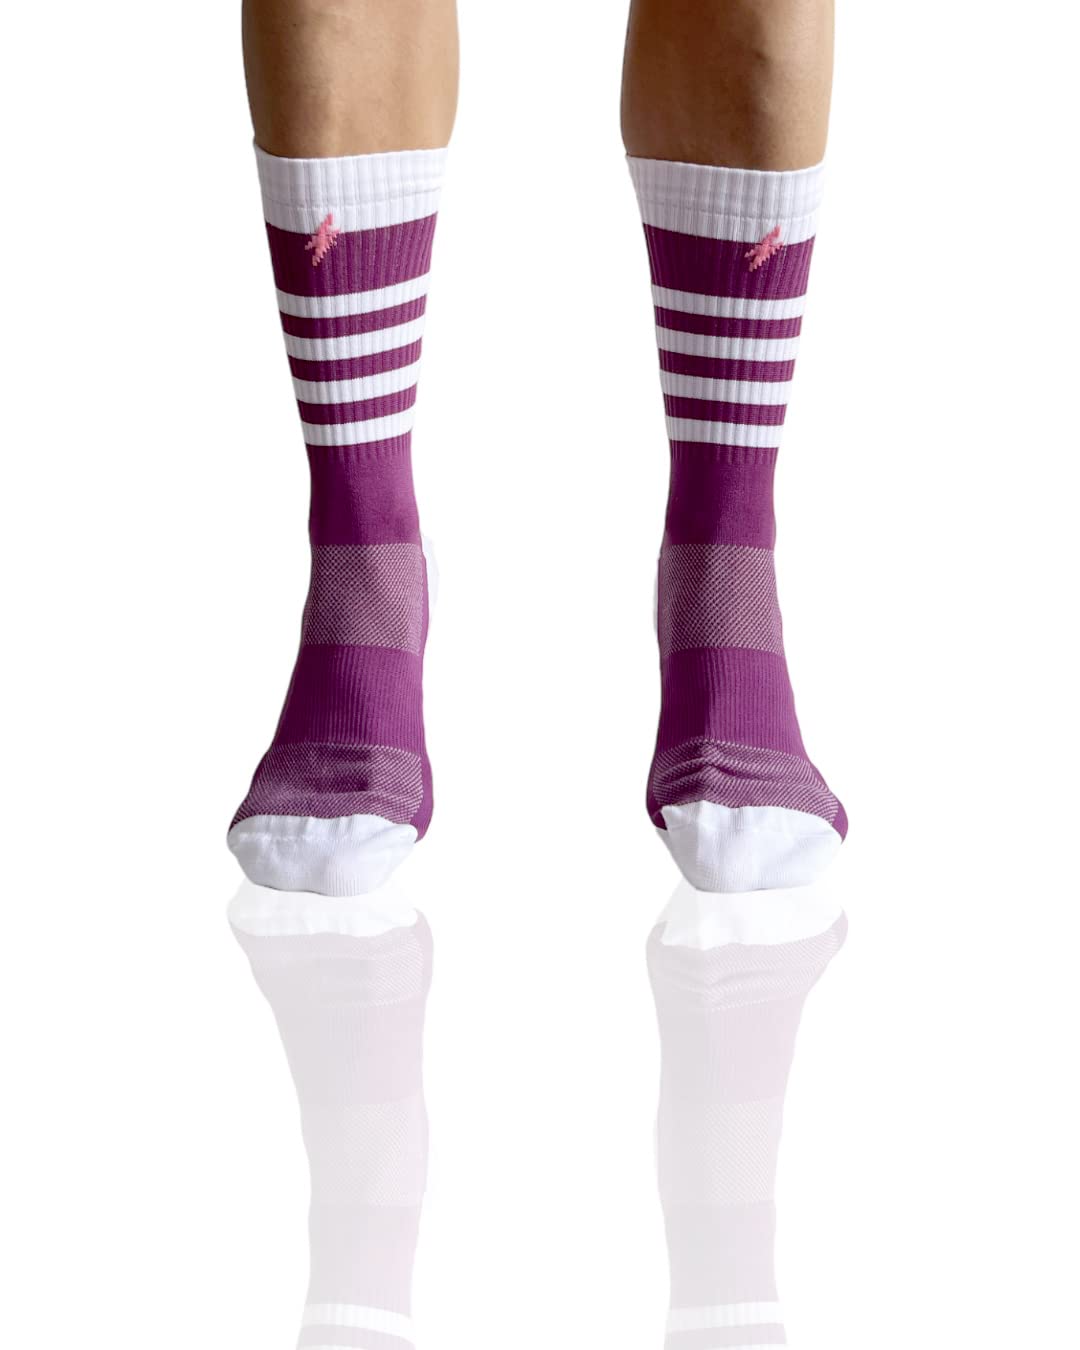 in s(h)ock Barcelona Sport Socks for Men and Women - Long Seamless Socks - Perfect for Cycling, Running, Padel and Basketball